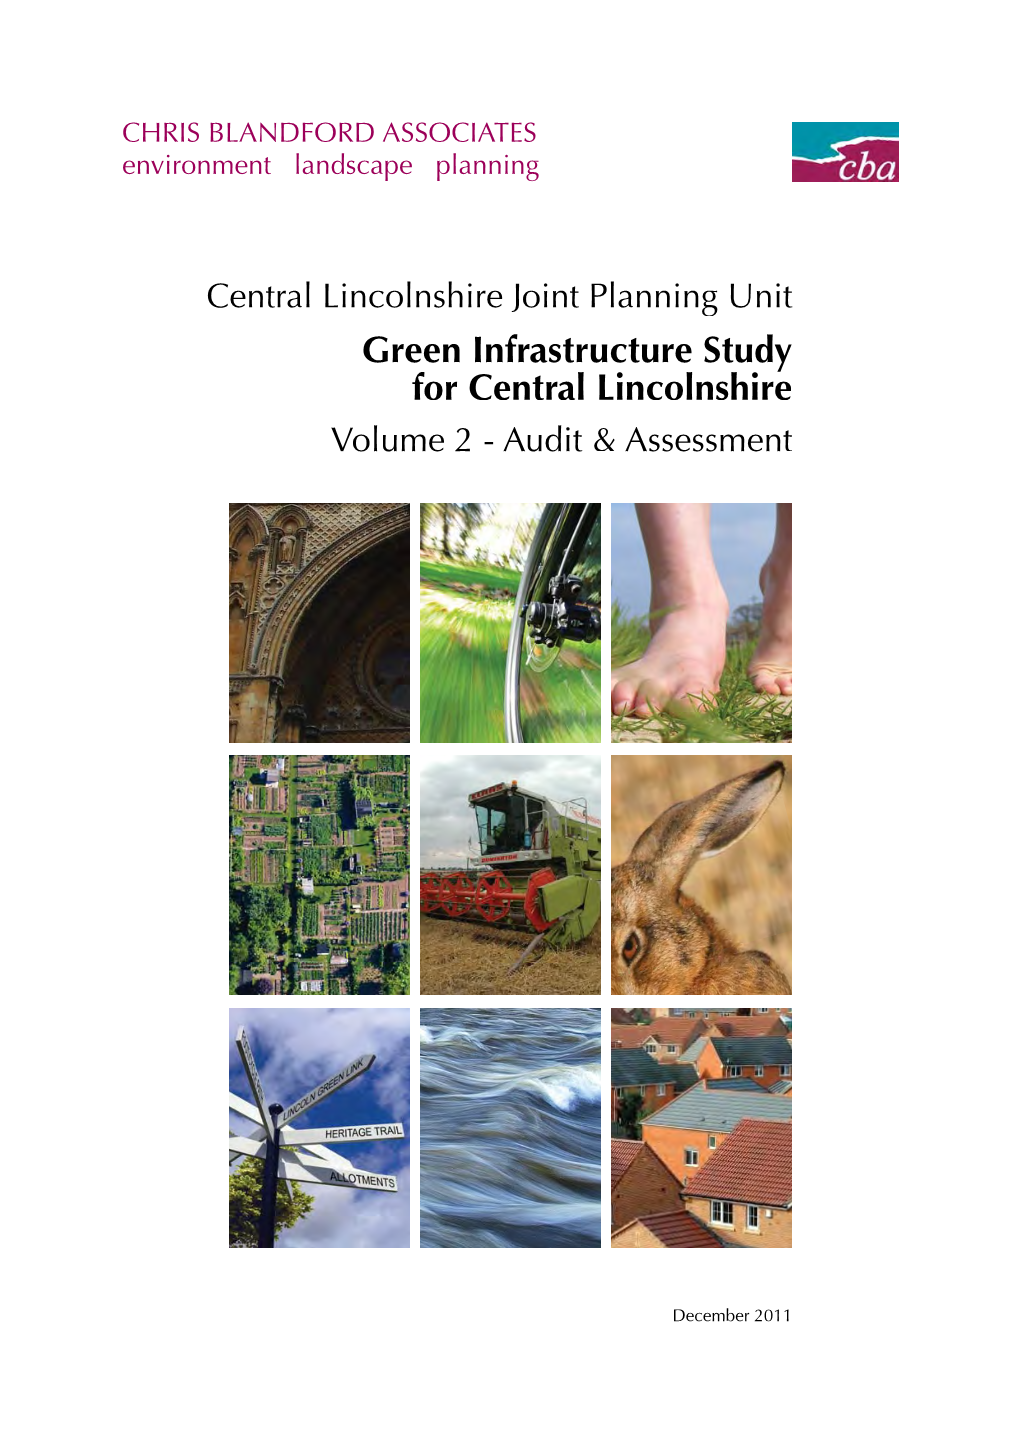 Green Infrastructure Study for Central Lincolnshire Volume 2 - Audit & Assessment